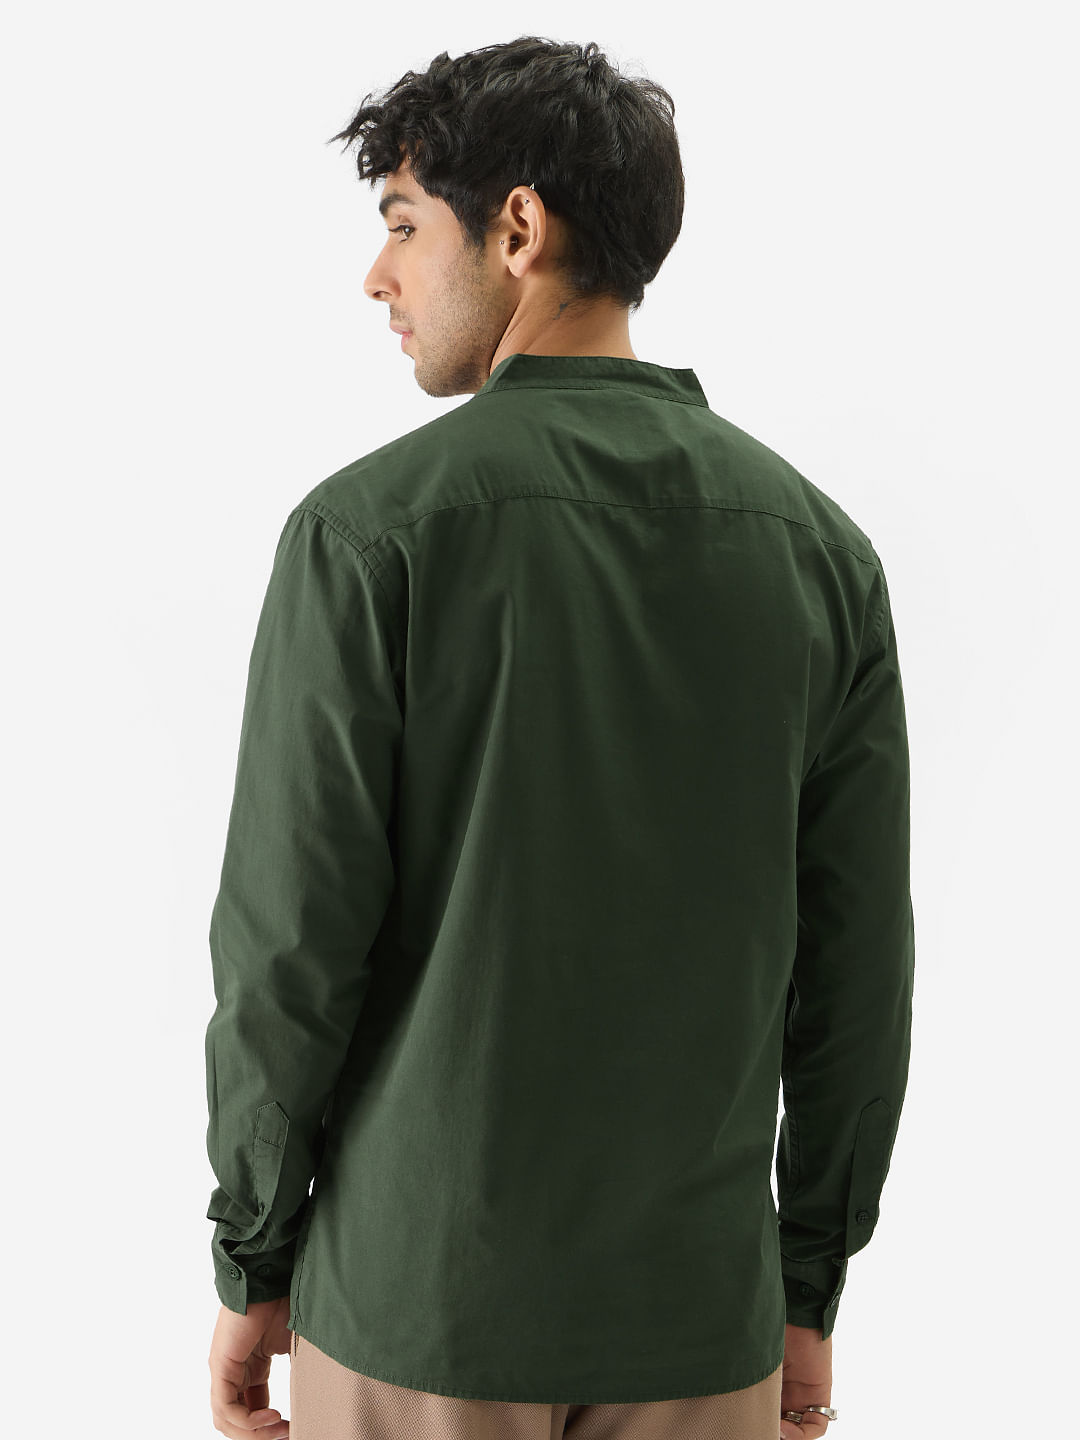 Buy Solids Olive Green Mandarin Shirt Online at The Souled Store.